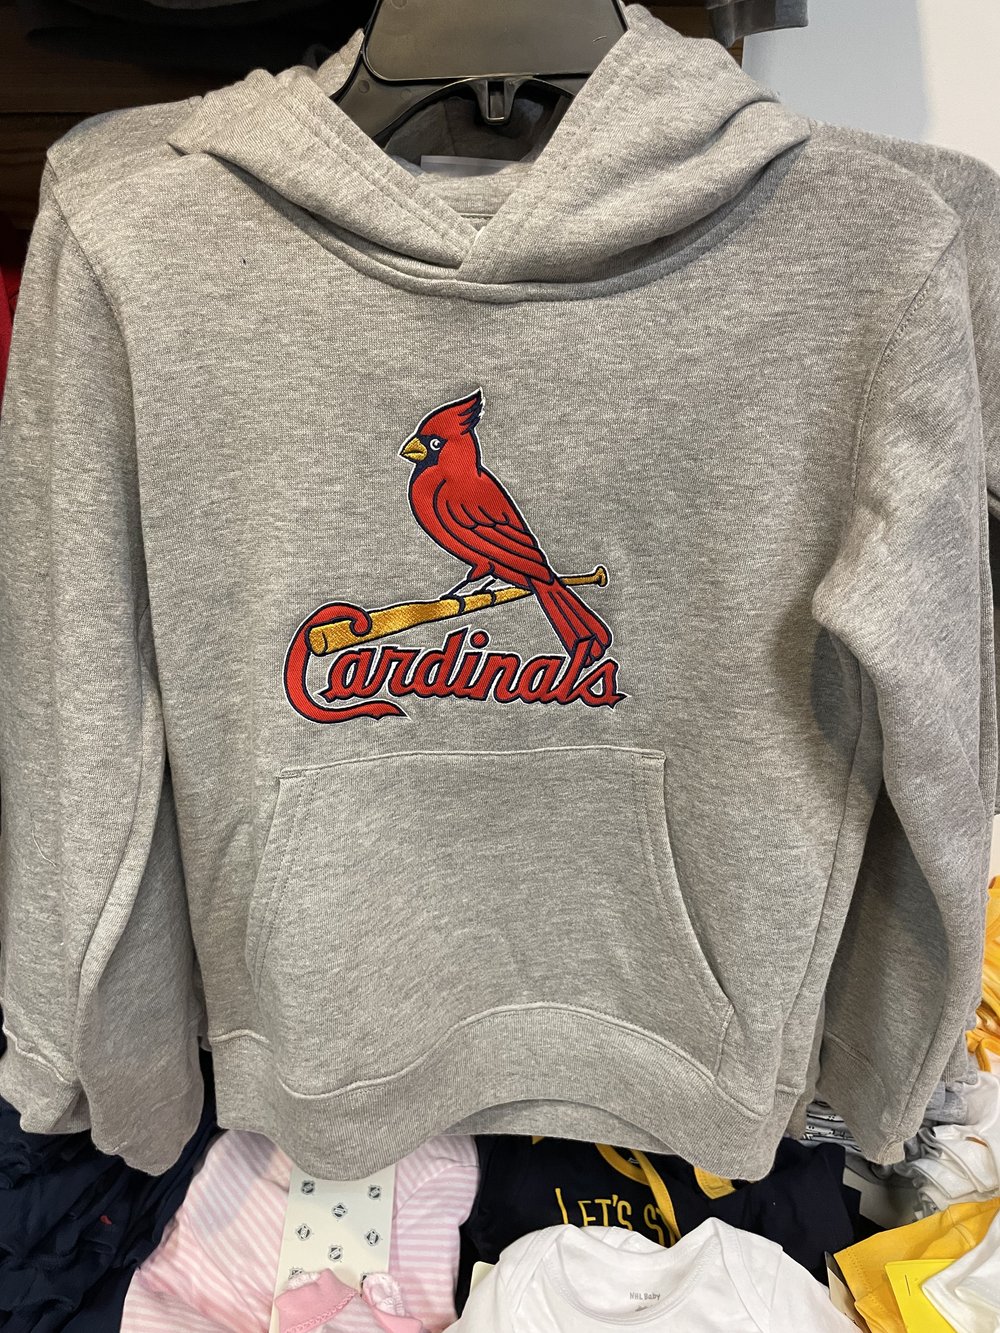 ST LOUIS CARDINALS KIDS EMBROIDERED FRONT HOODY